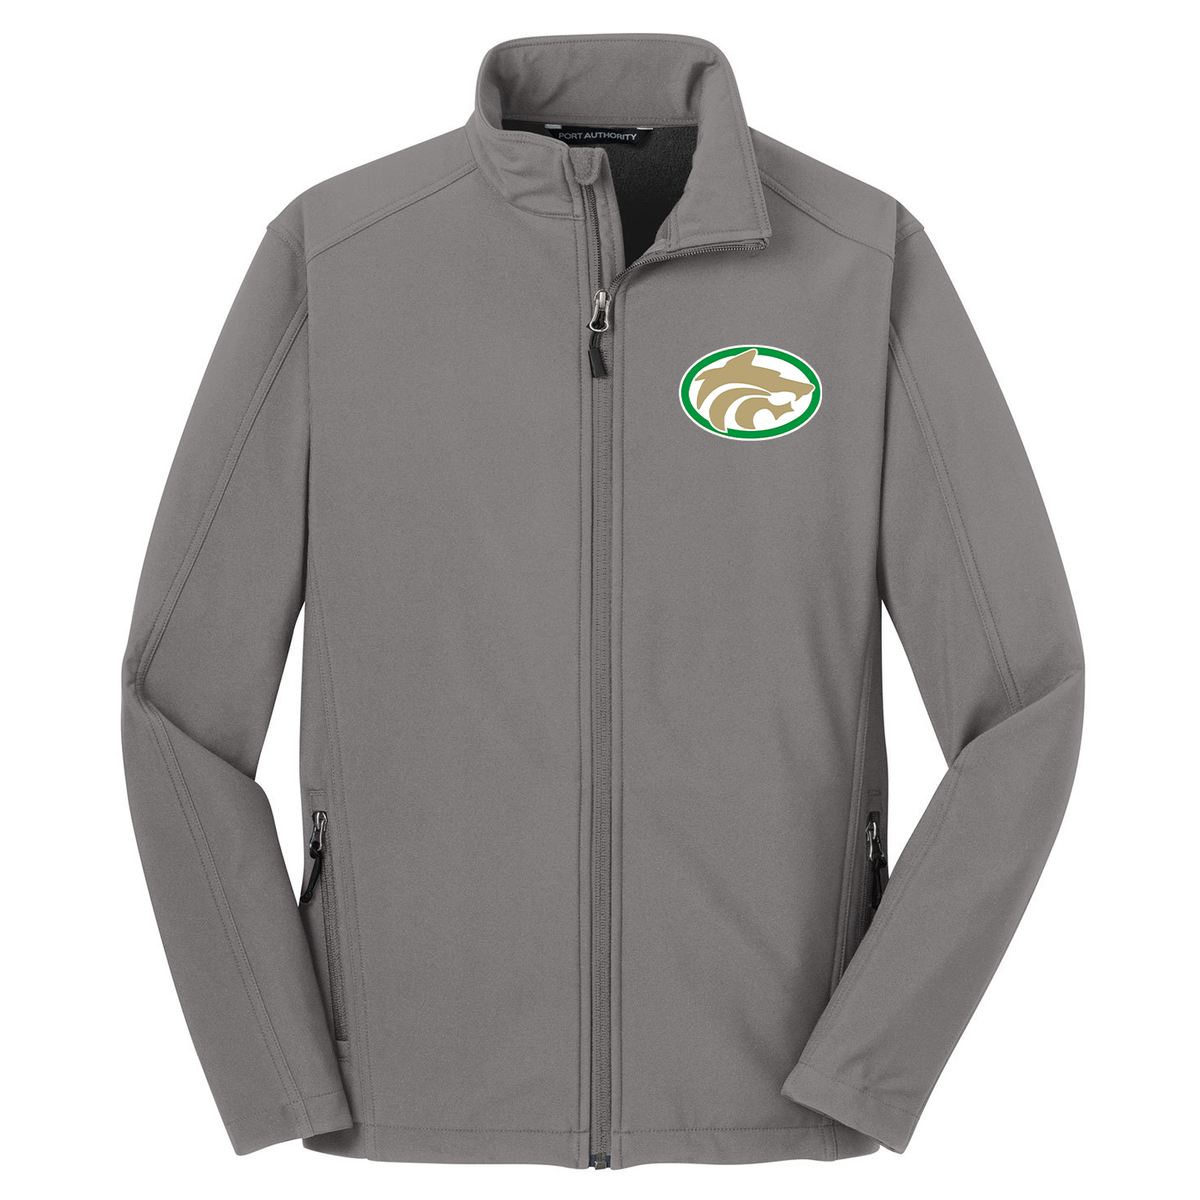 Buford Youth Lacrosse Soft Shell Jacket